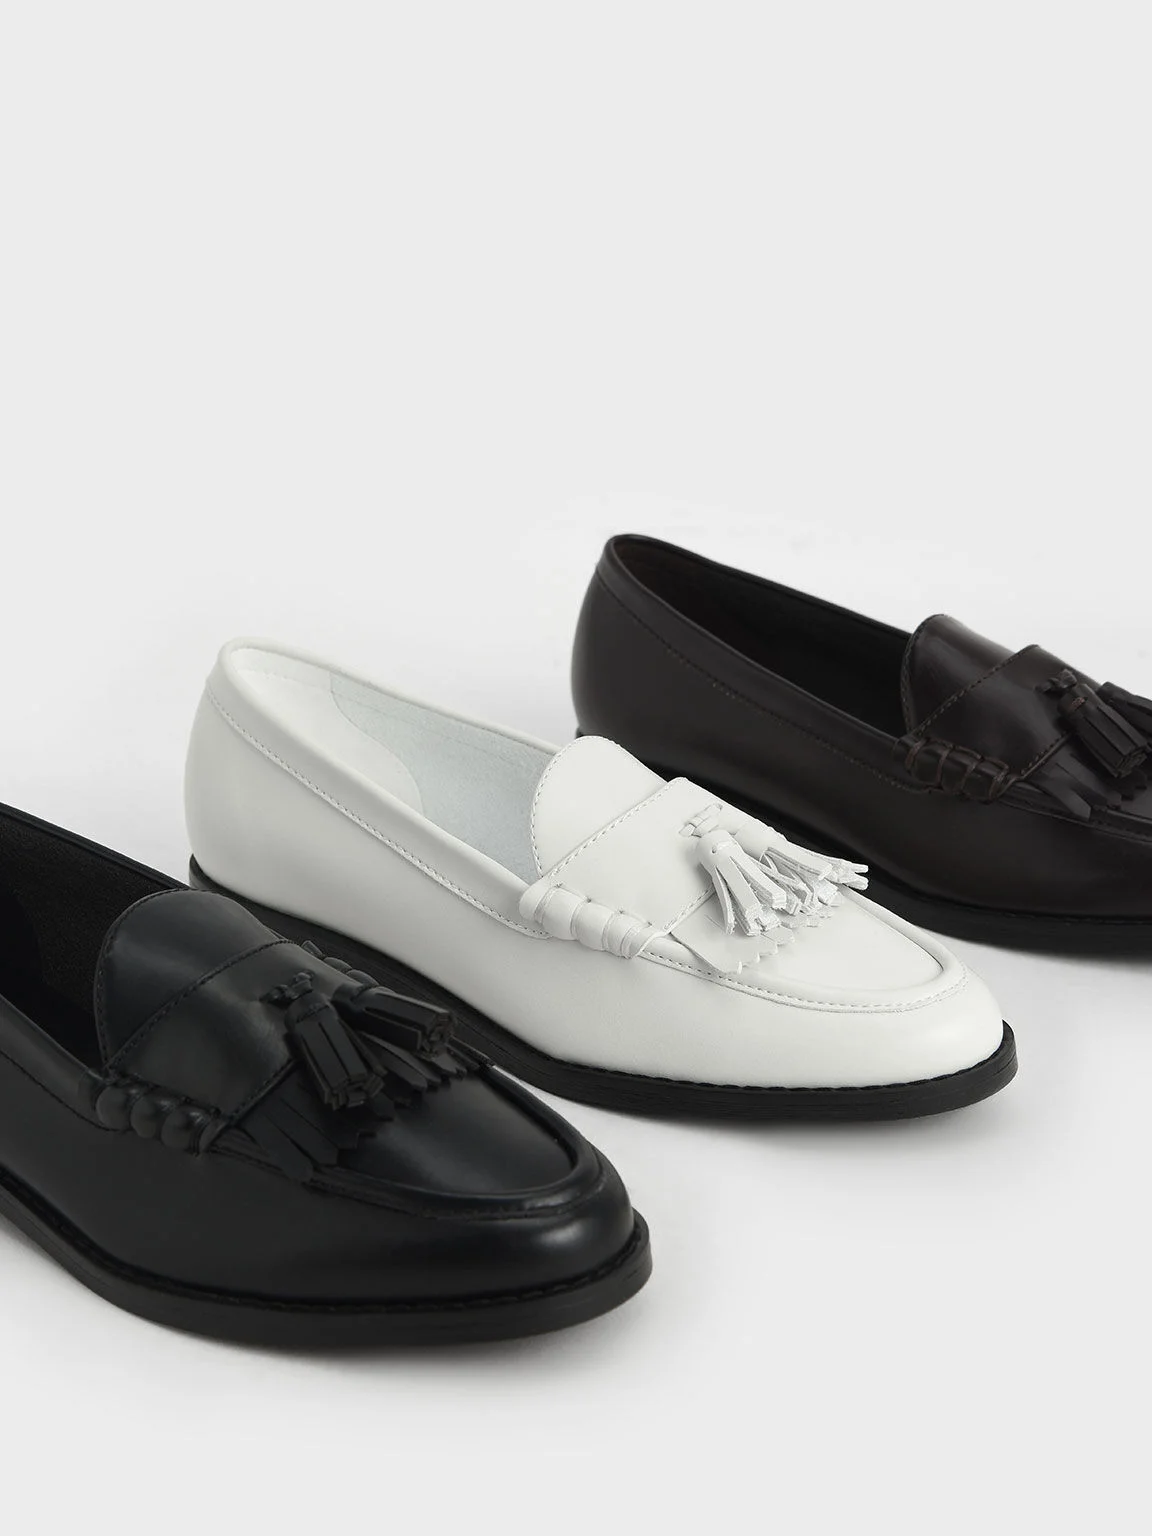 Women’s tassel penny loafers - CHARLES & KEITH